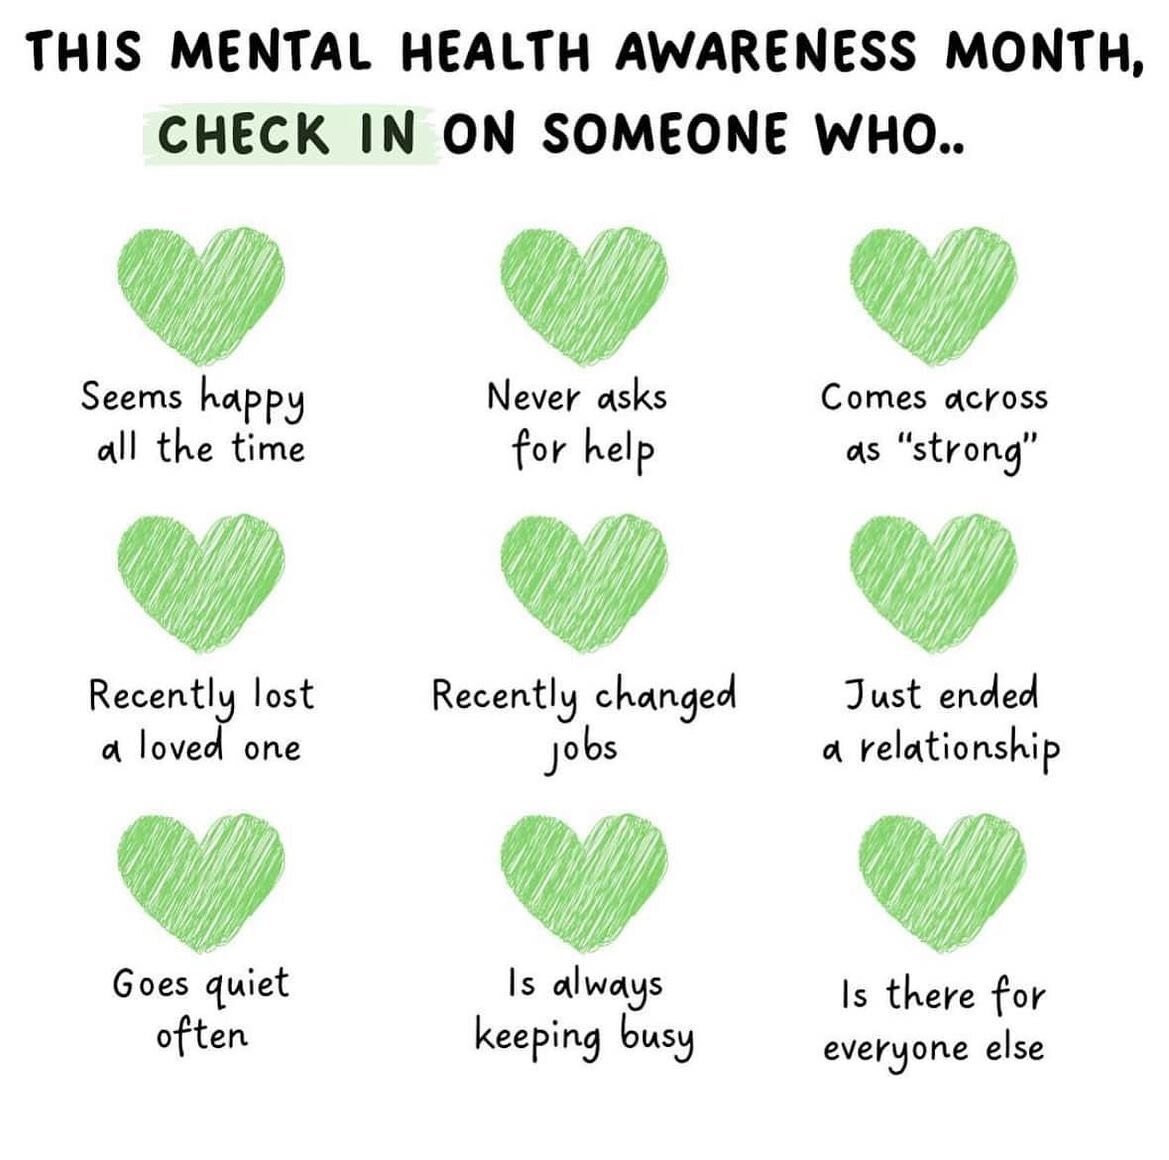 It&rsquo;s Mental Health Awareness Month. Let&rsquo;s change the narrative.

PC: The Happiness Project and Sports Mental Health Advocate 

#mentalhealth #mentalhealthawarenessmonth #checkin #bettertogether